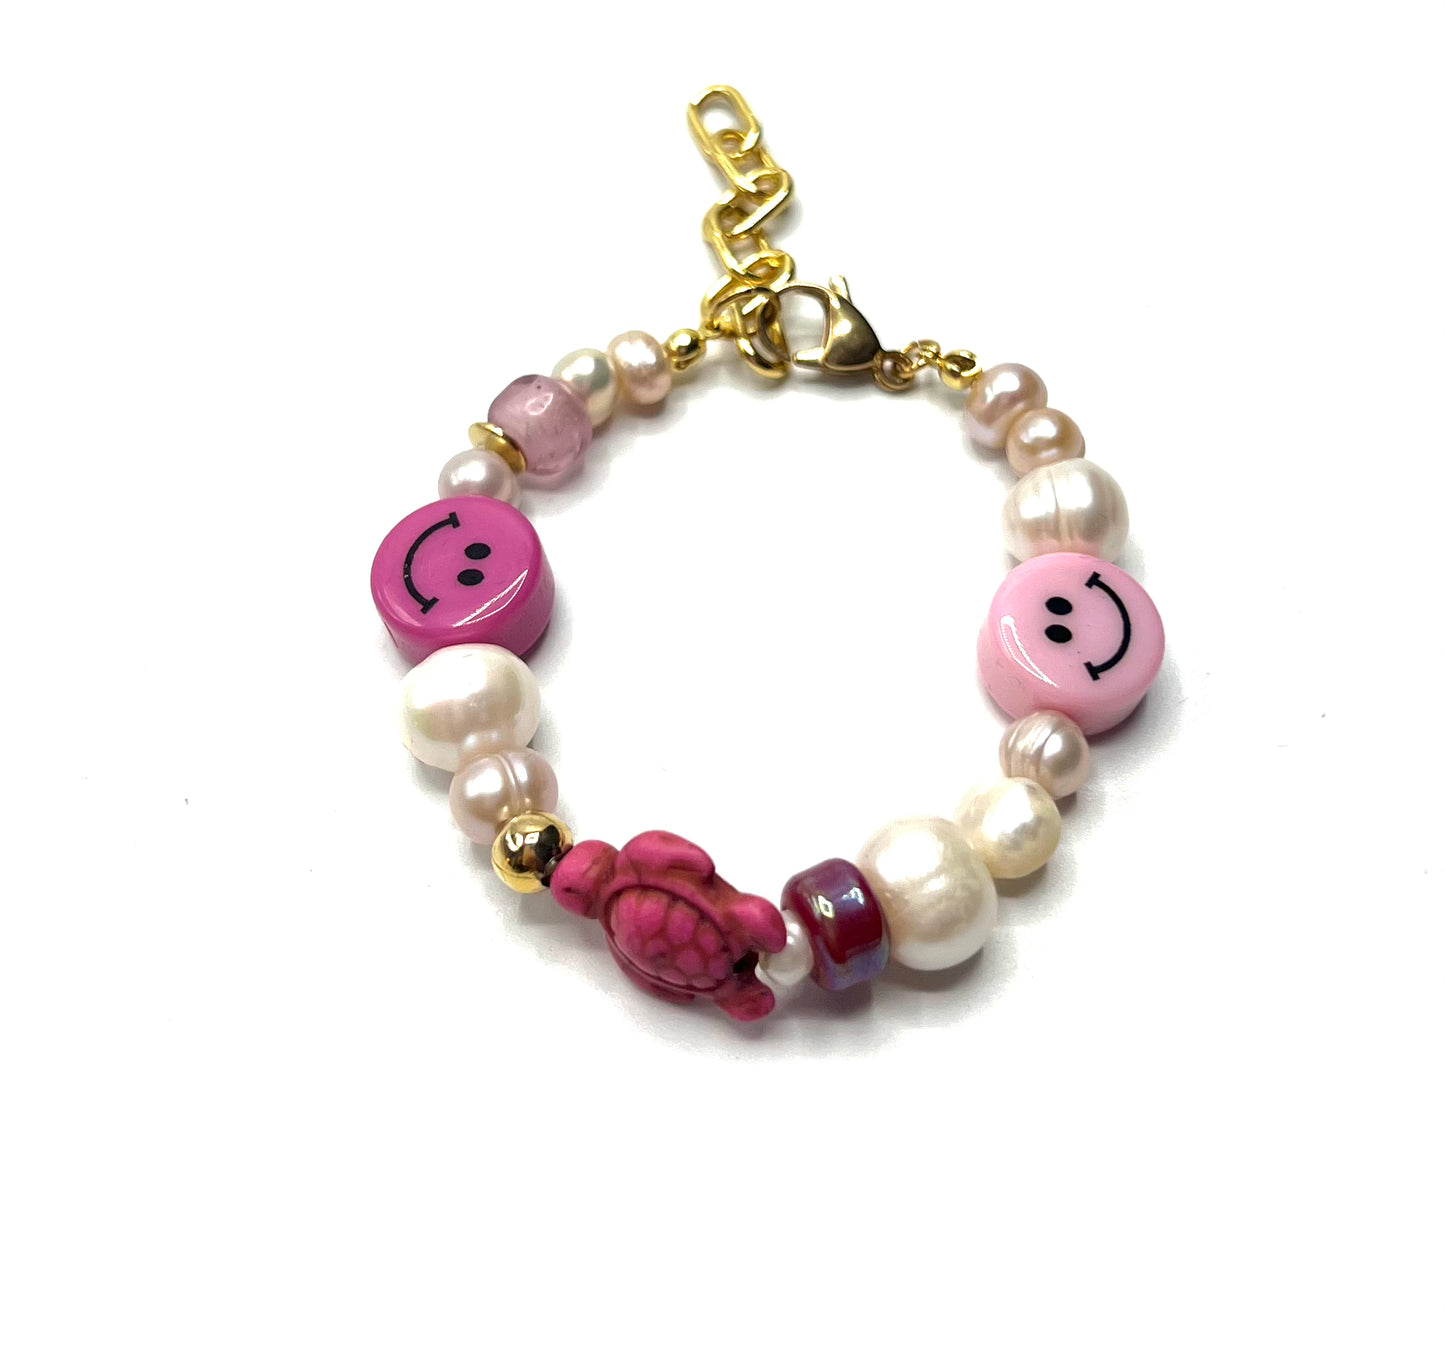 ONE OF A KIND PEARL BRACELET